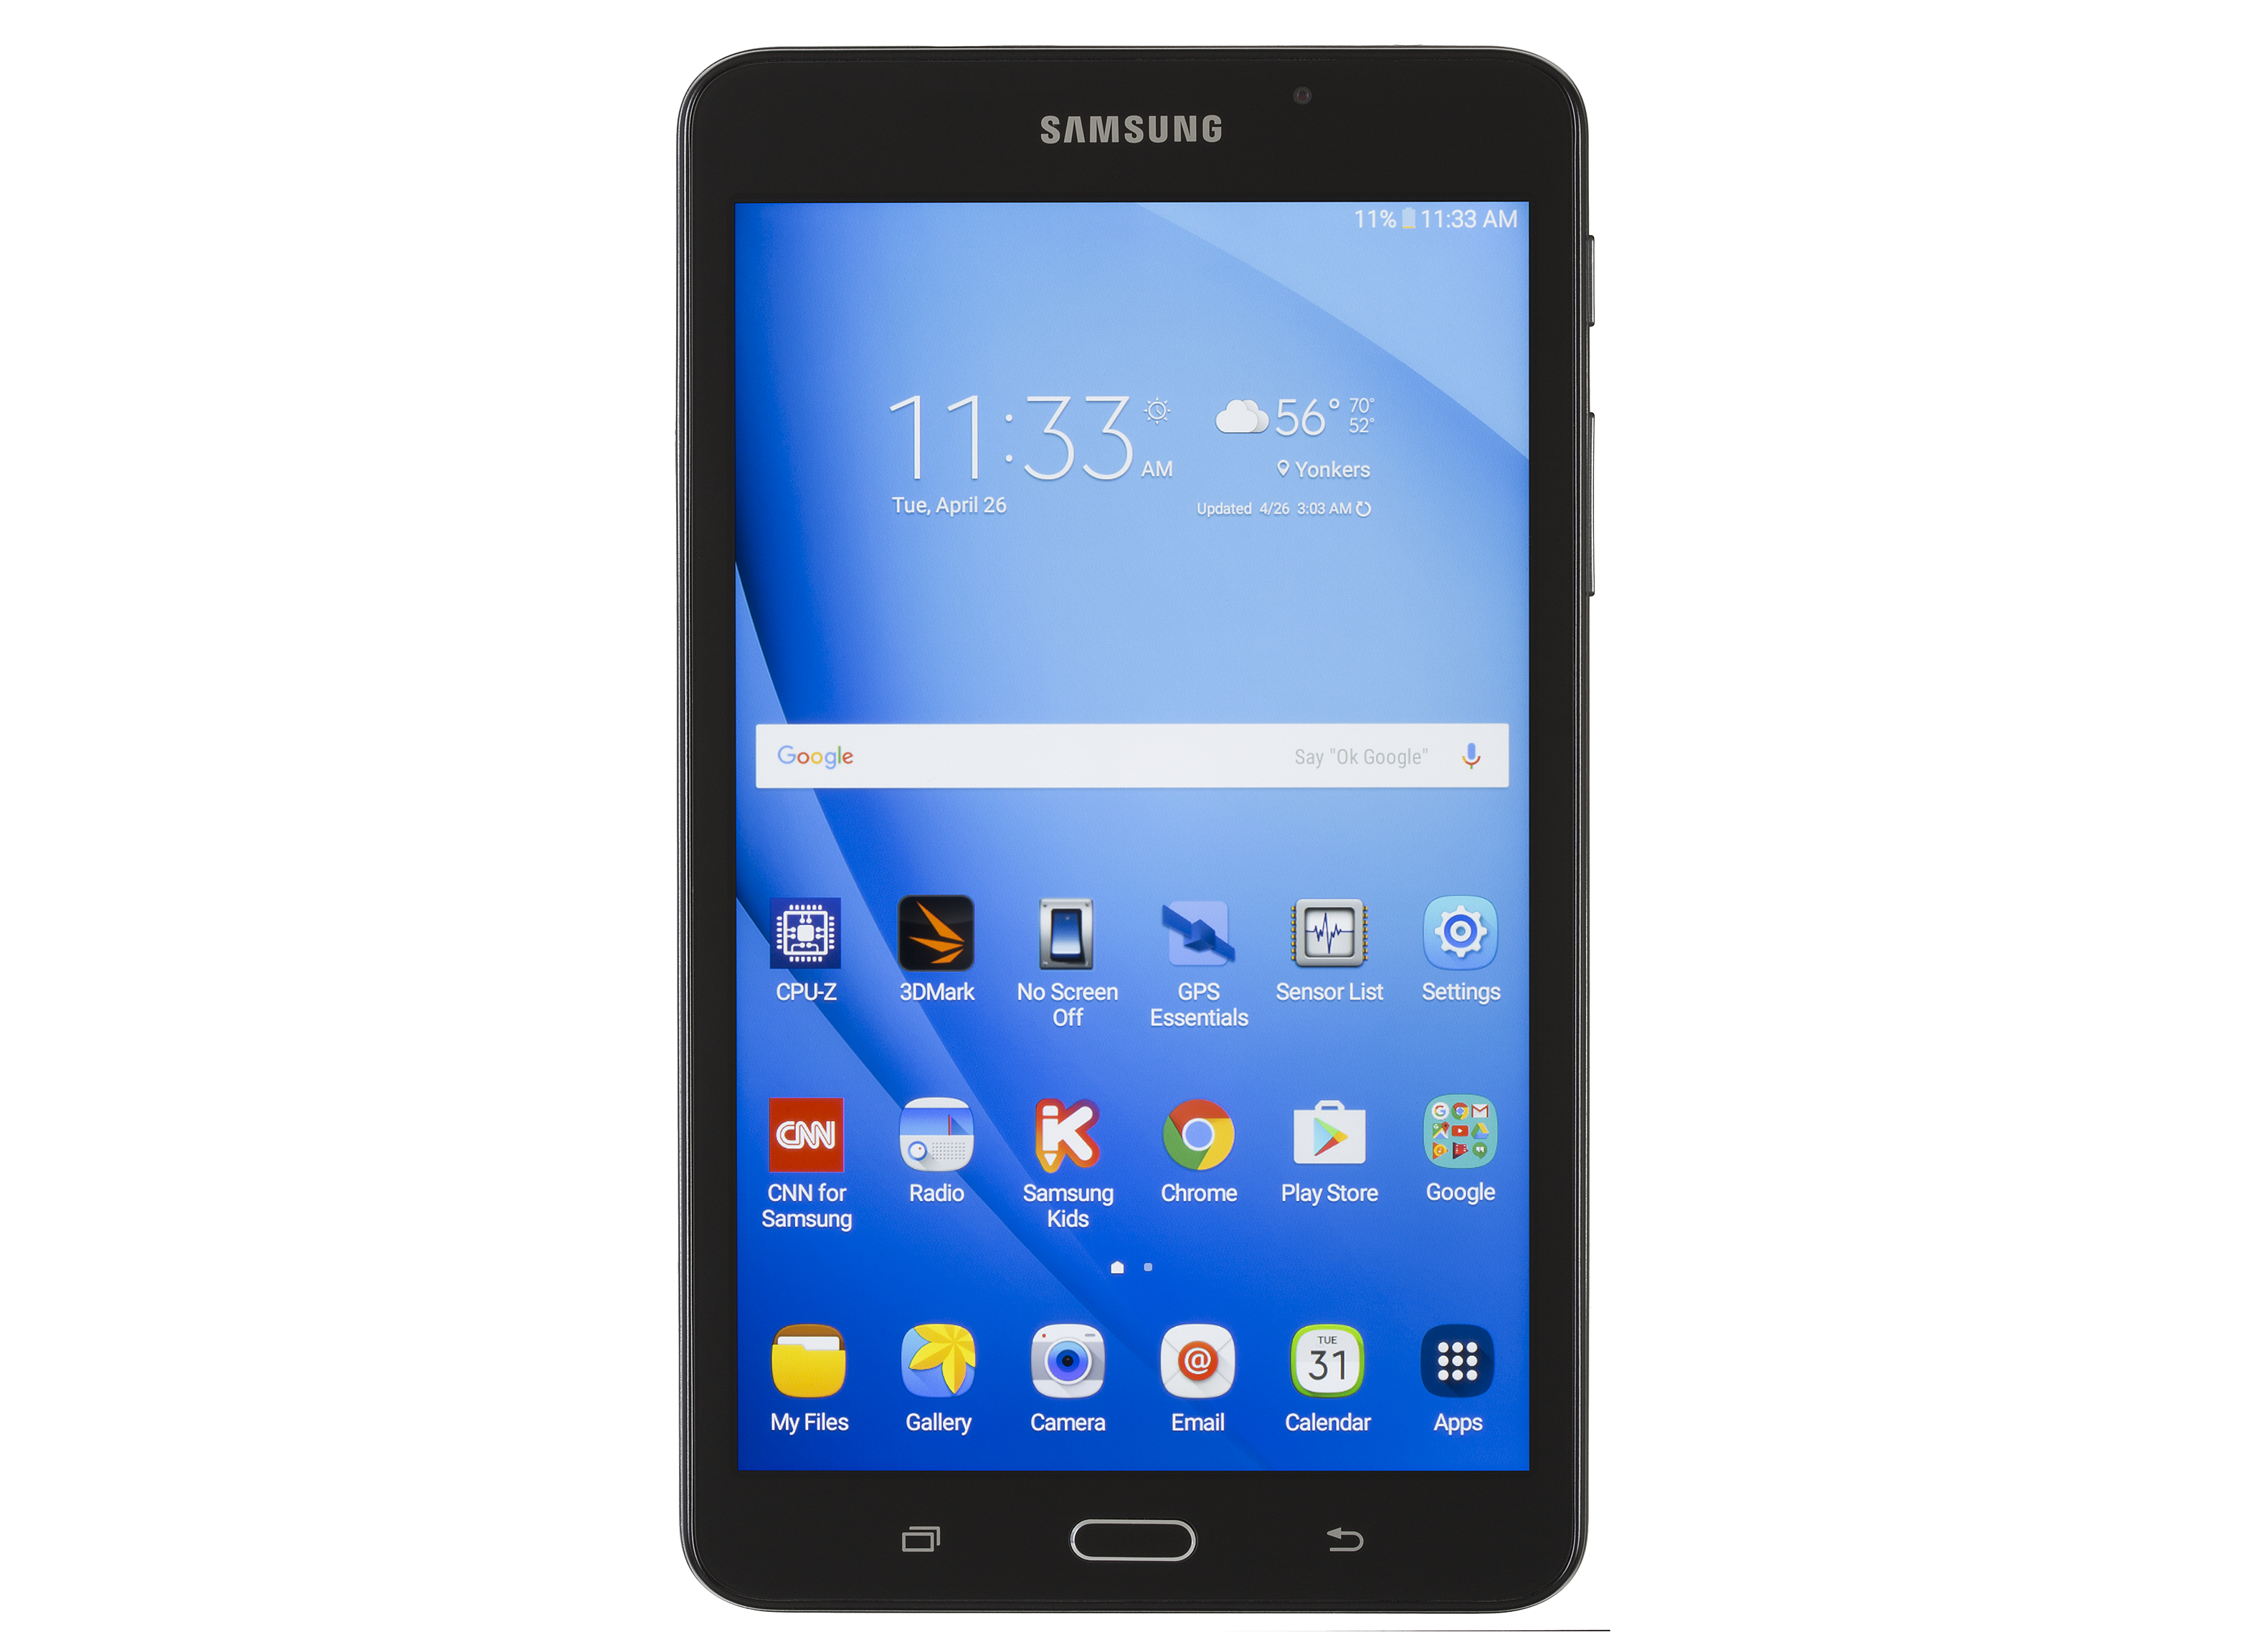 Shah Admit empty Samsung Galaxy Tab A 7.0 SM-T280 (8GB) Tablet Review - Consumer Reports